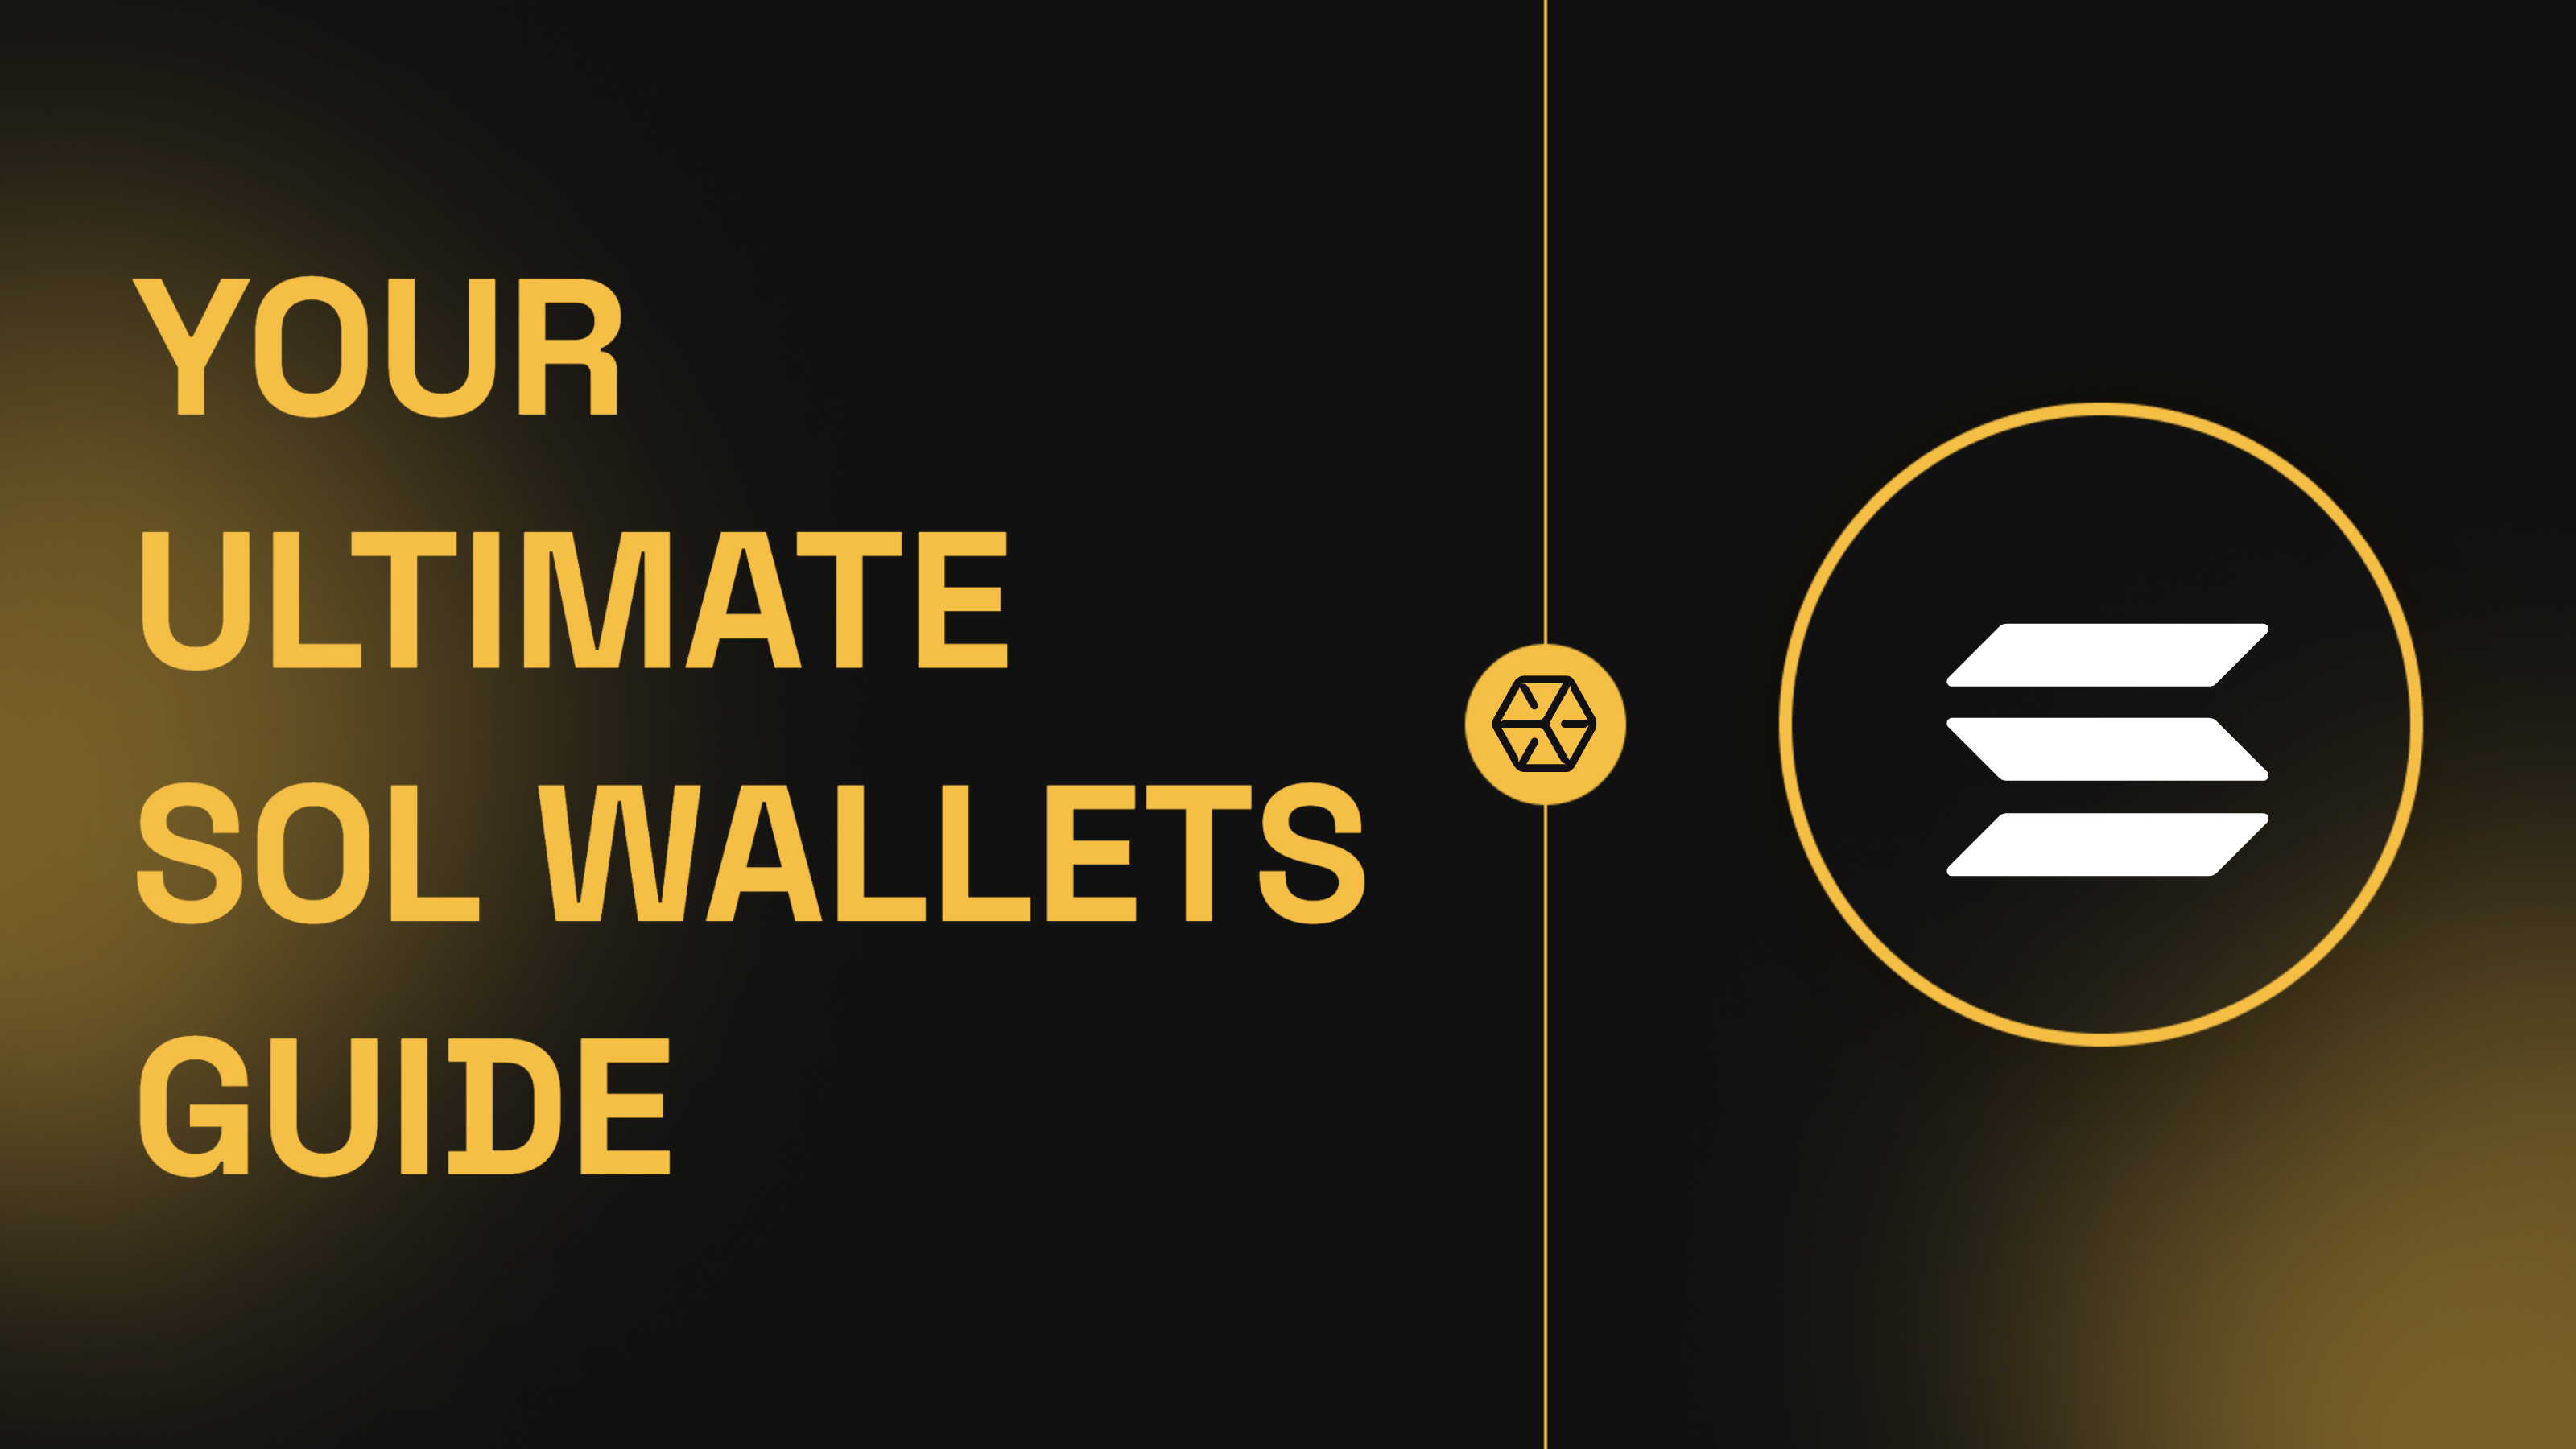 YOUR ULTIMATE SOL WALLETS GUIDE